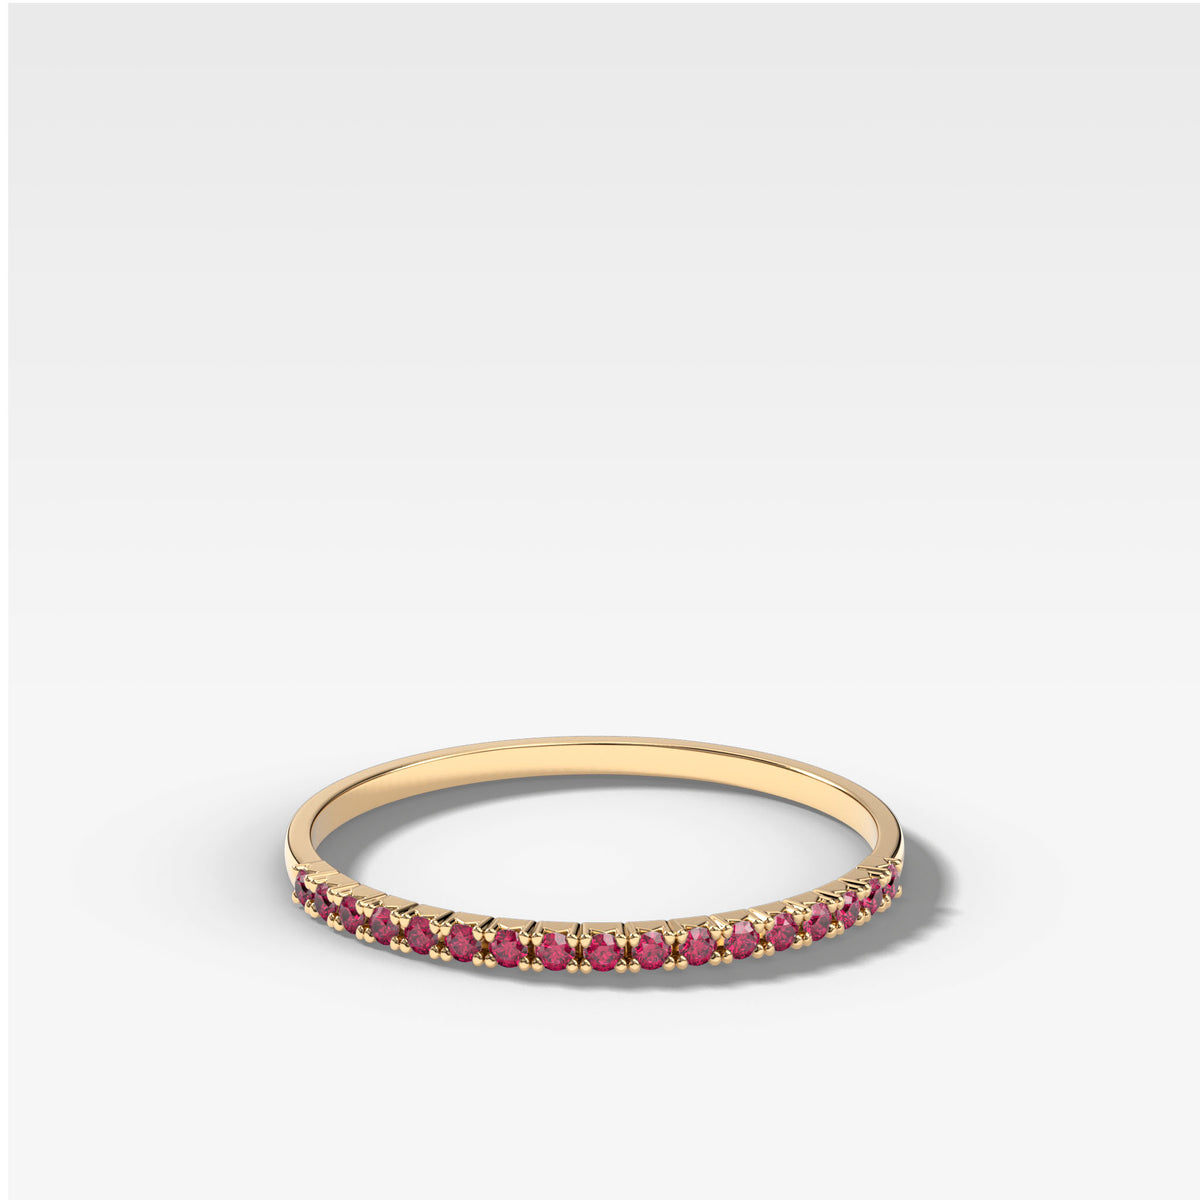 Red Ruby Petite French Pavé Wedding Band